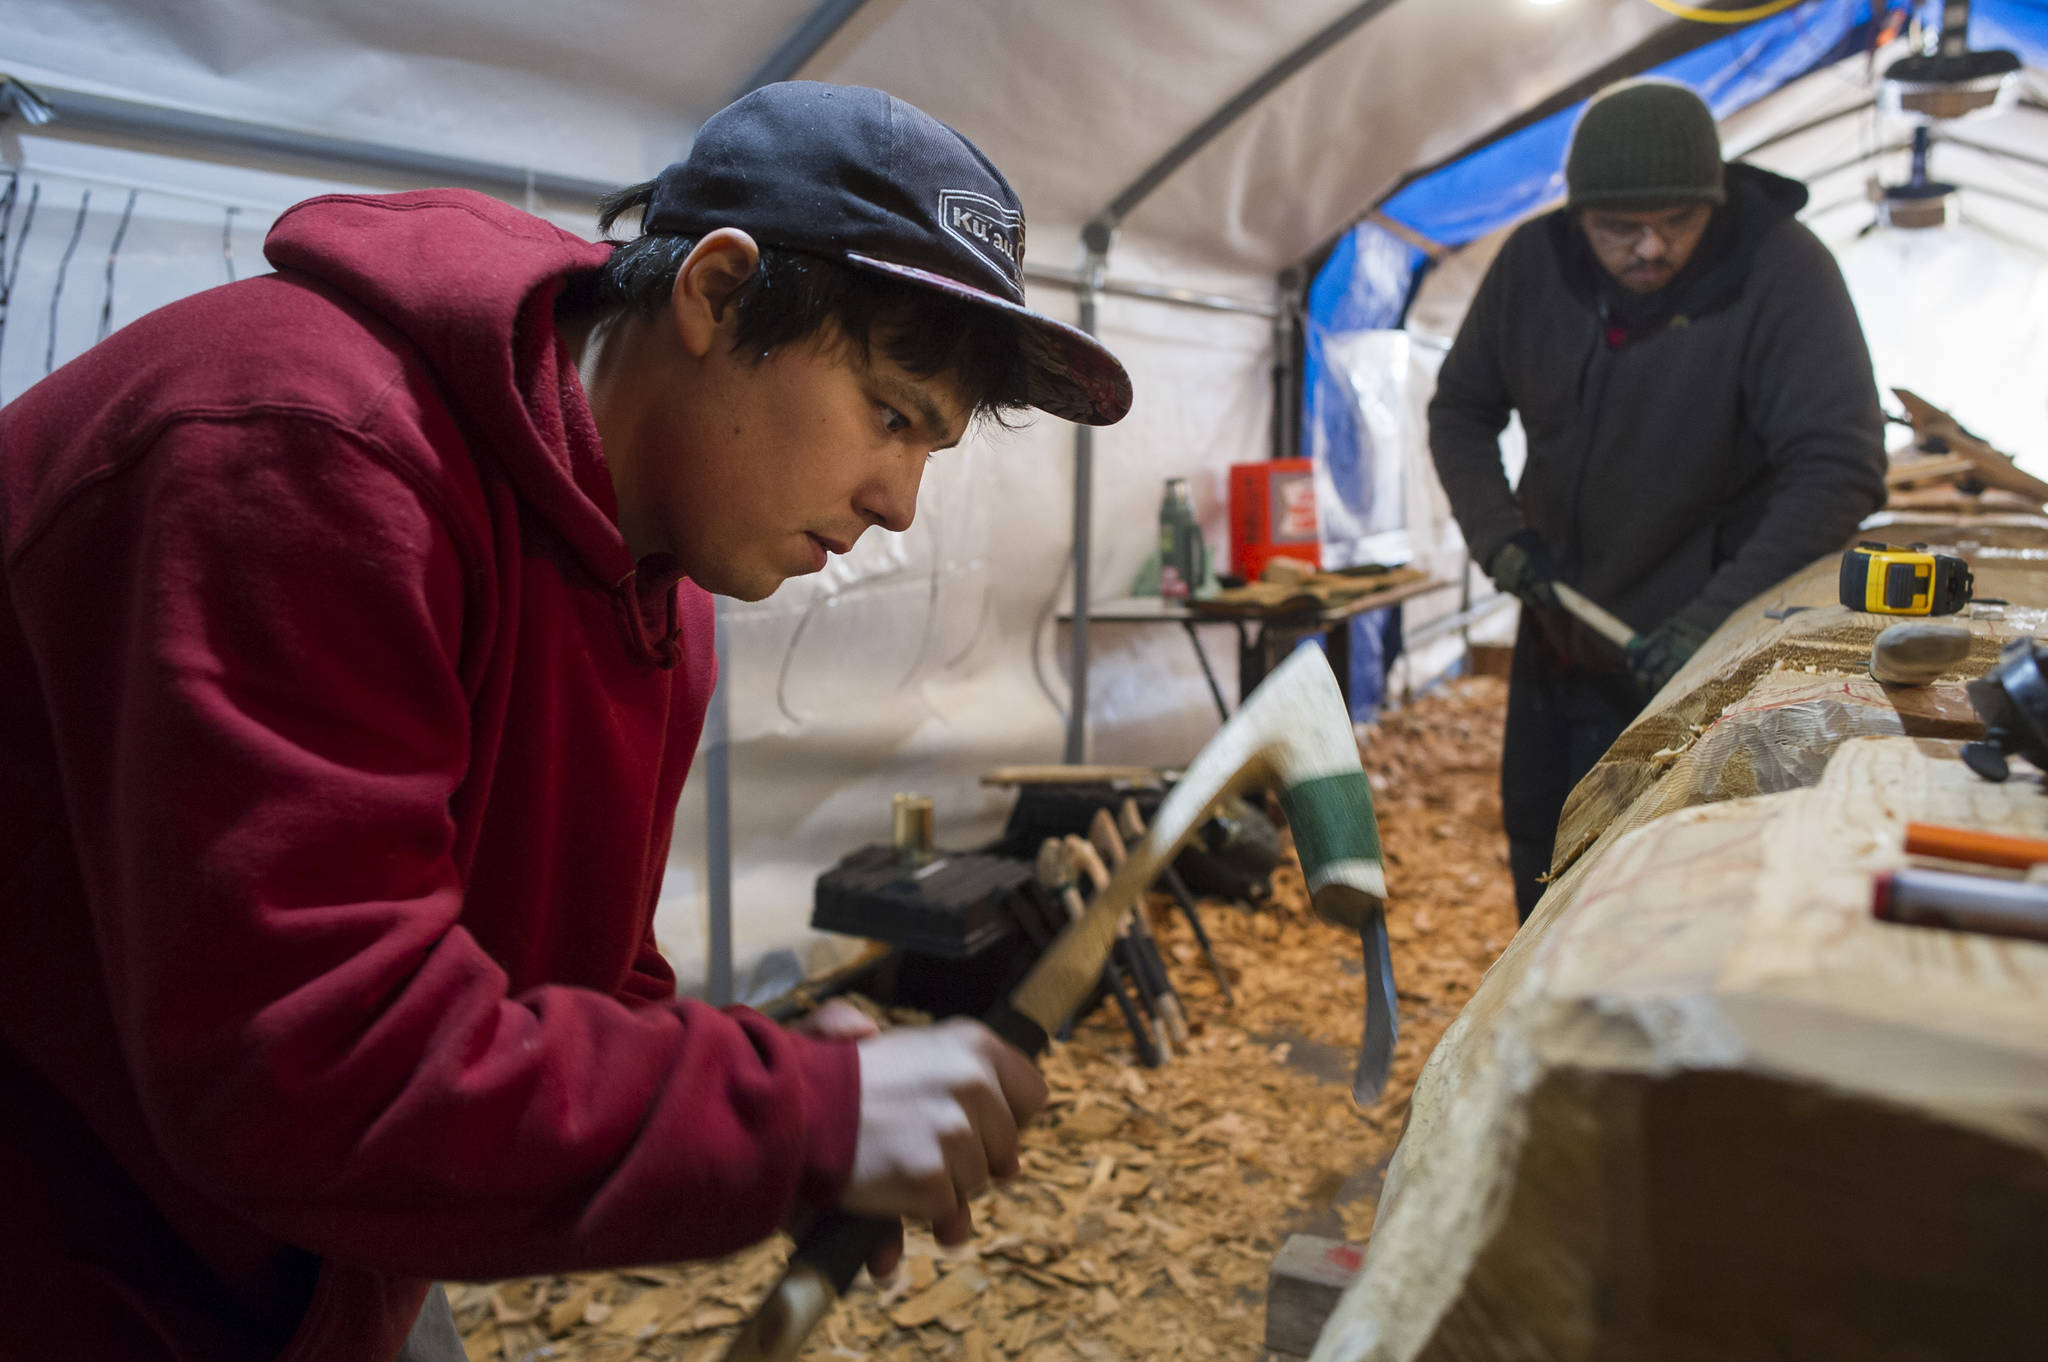 Carvers Lee Burkhart, left, and Herb Sheakley work on the Wolf Totem Pole at Harborview Elementary School on Tuesday, Dec. 5, 2017. (Michael Penn | Juneau Empire)